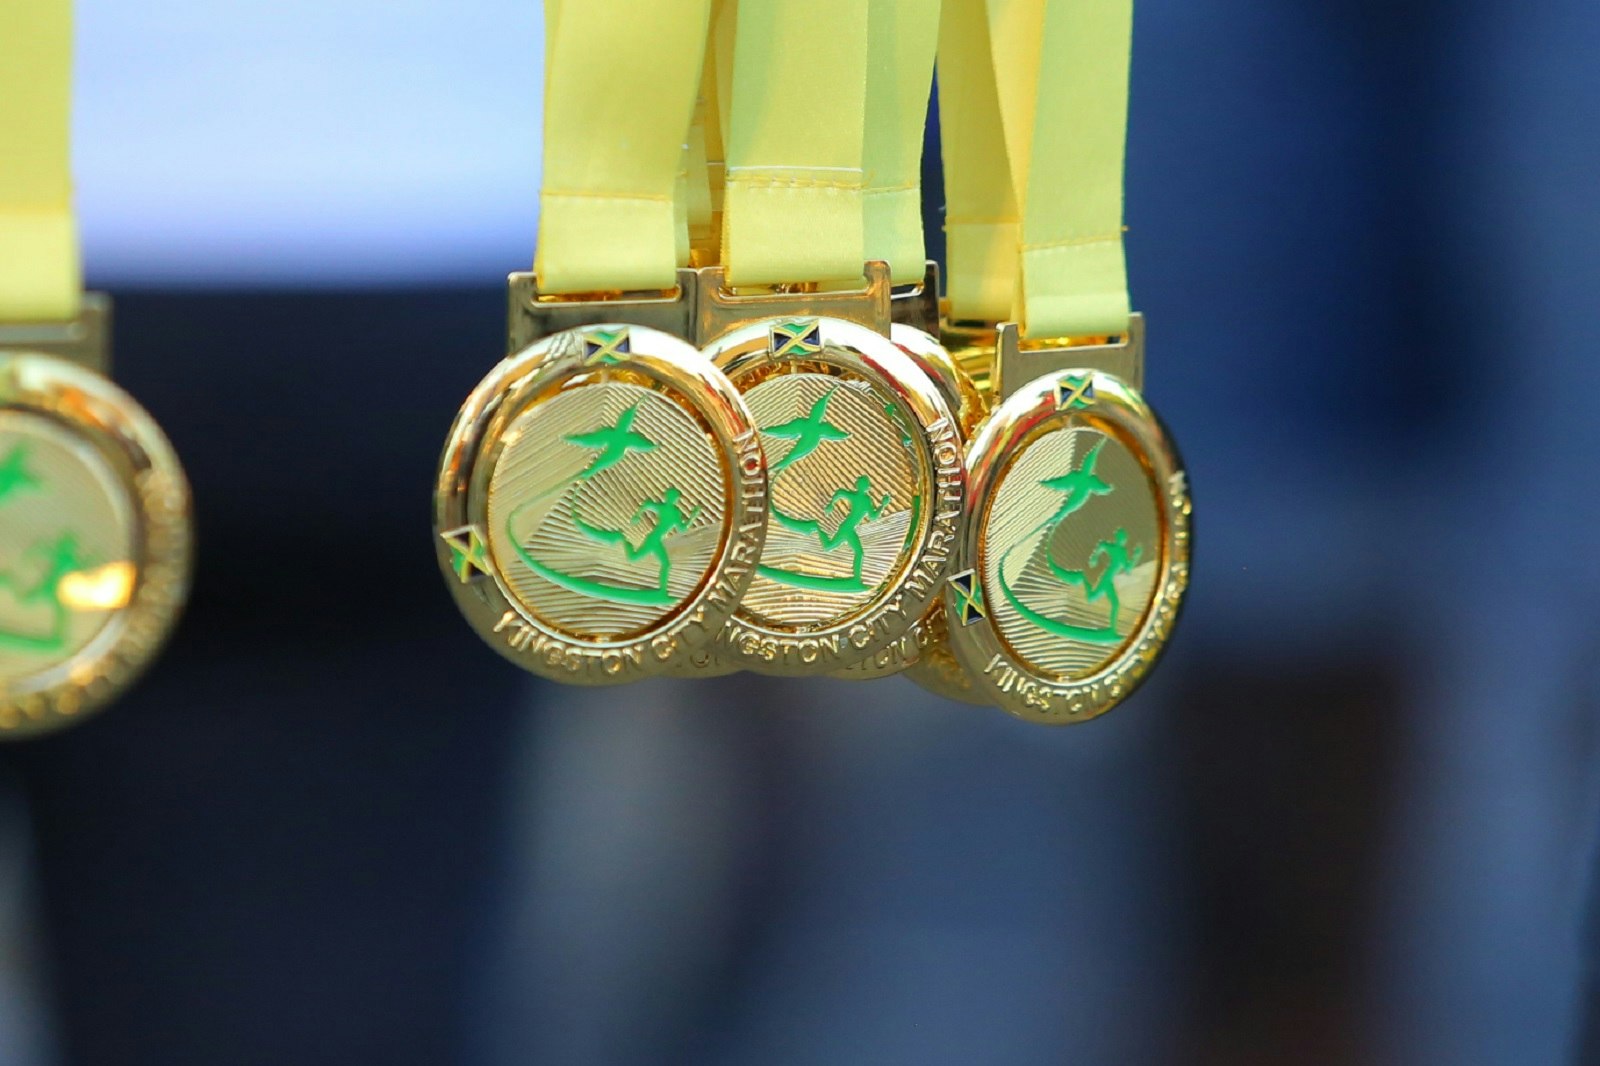 Several gold finishers' medals with gold ribbon hang down with a blurred background; they read 'Kingston City Marathon'